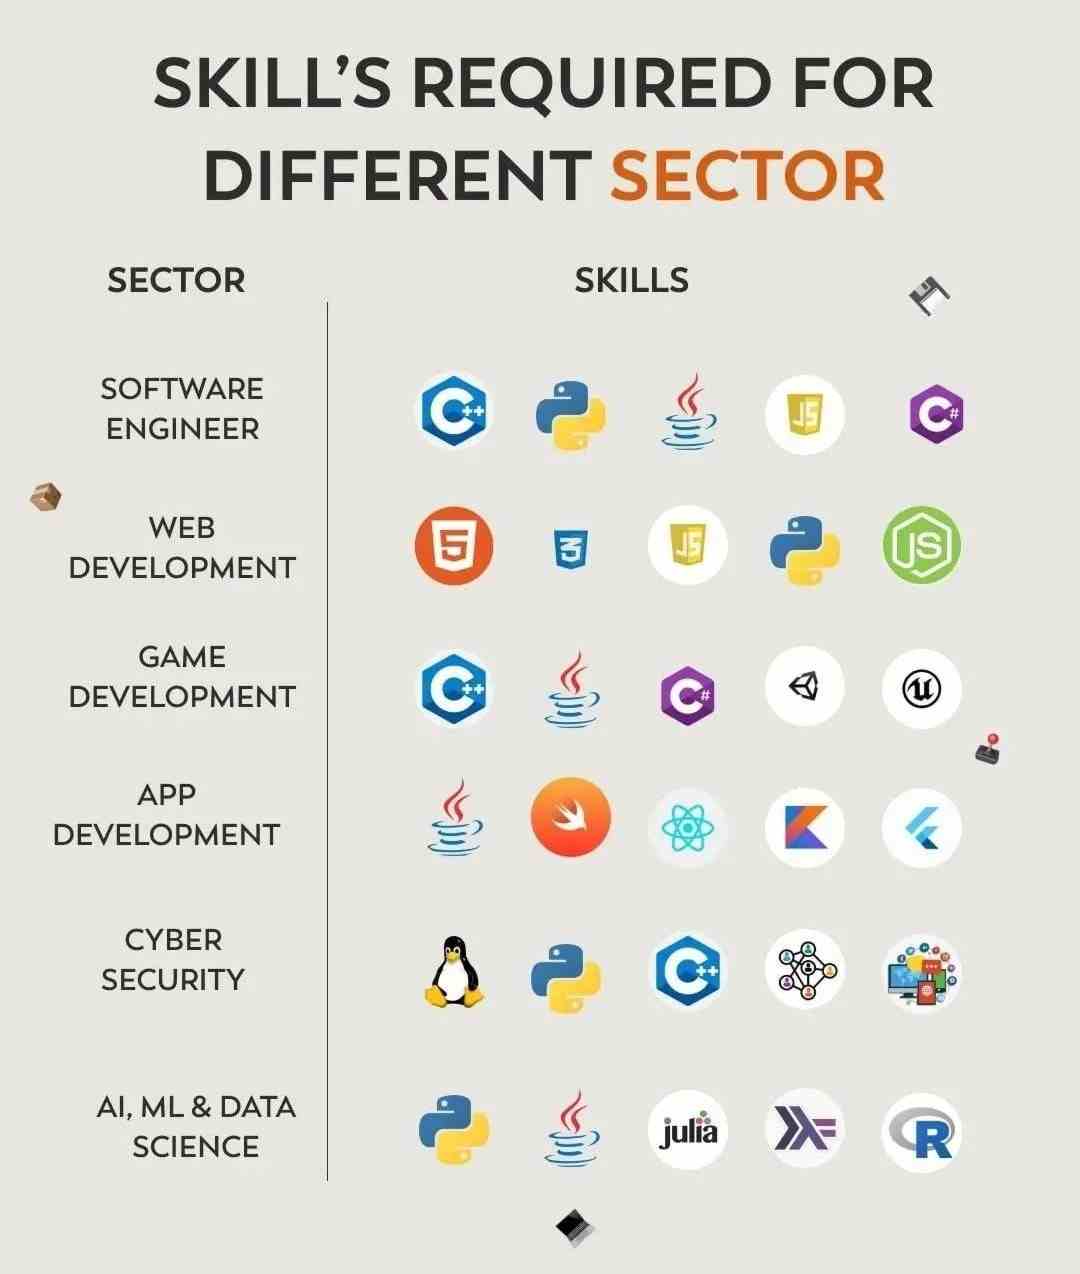 Skills required for different sector